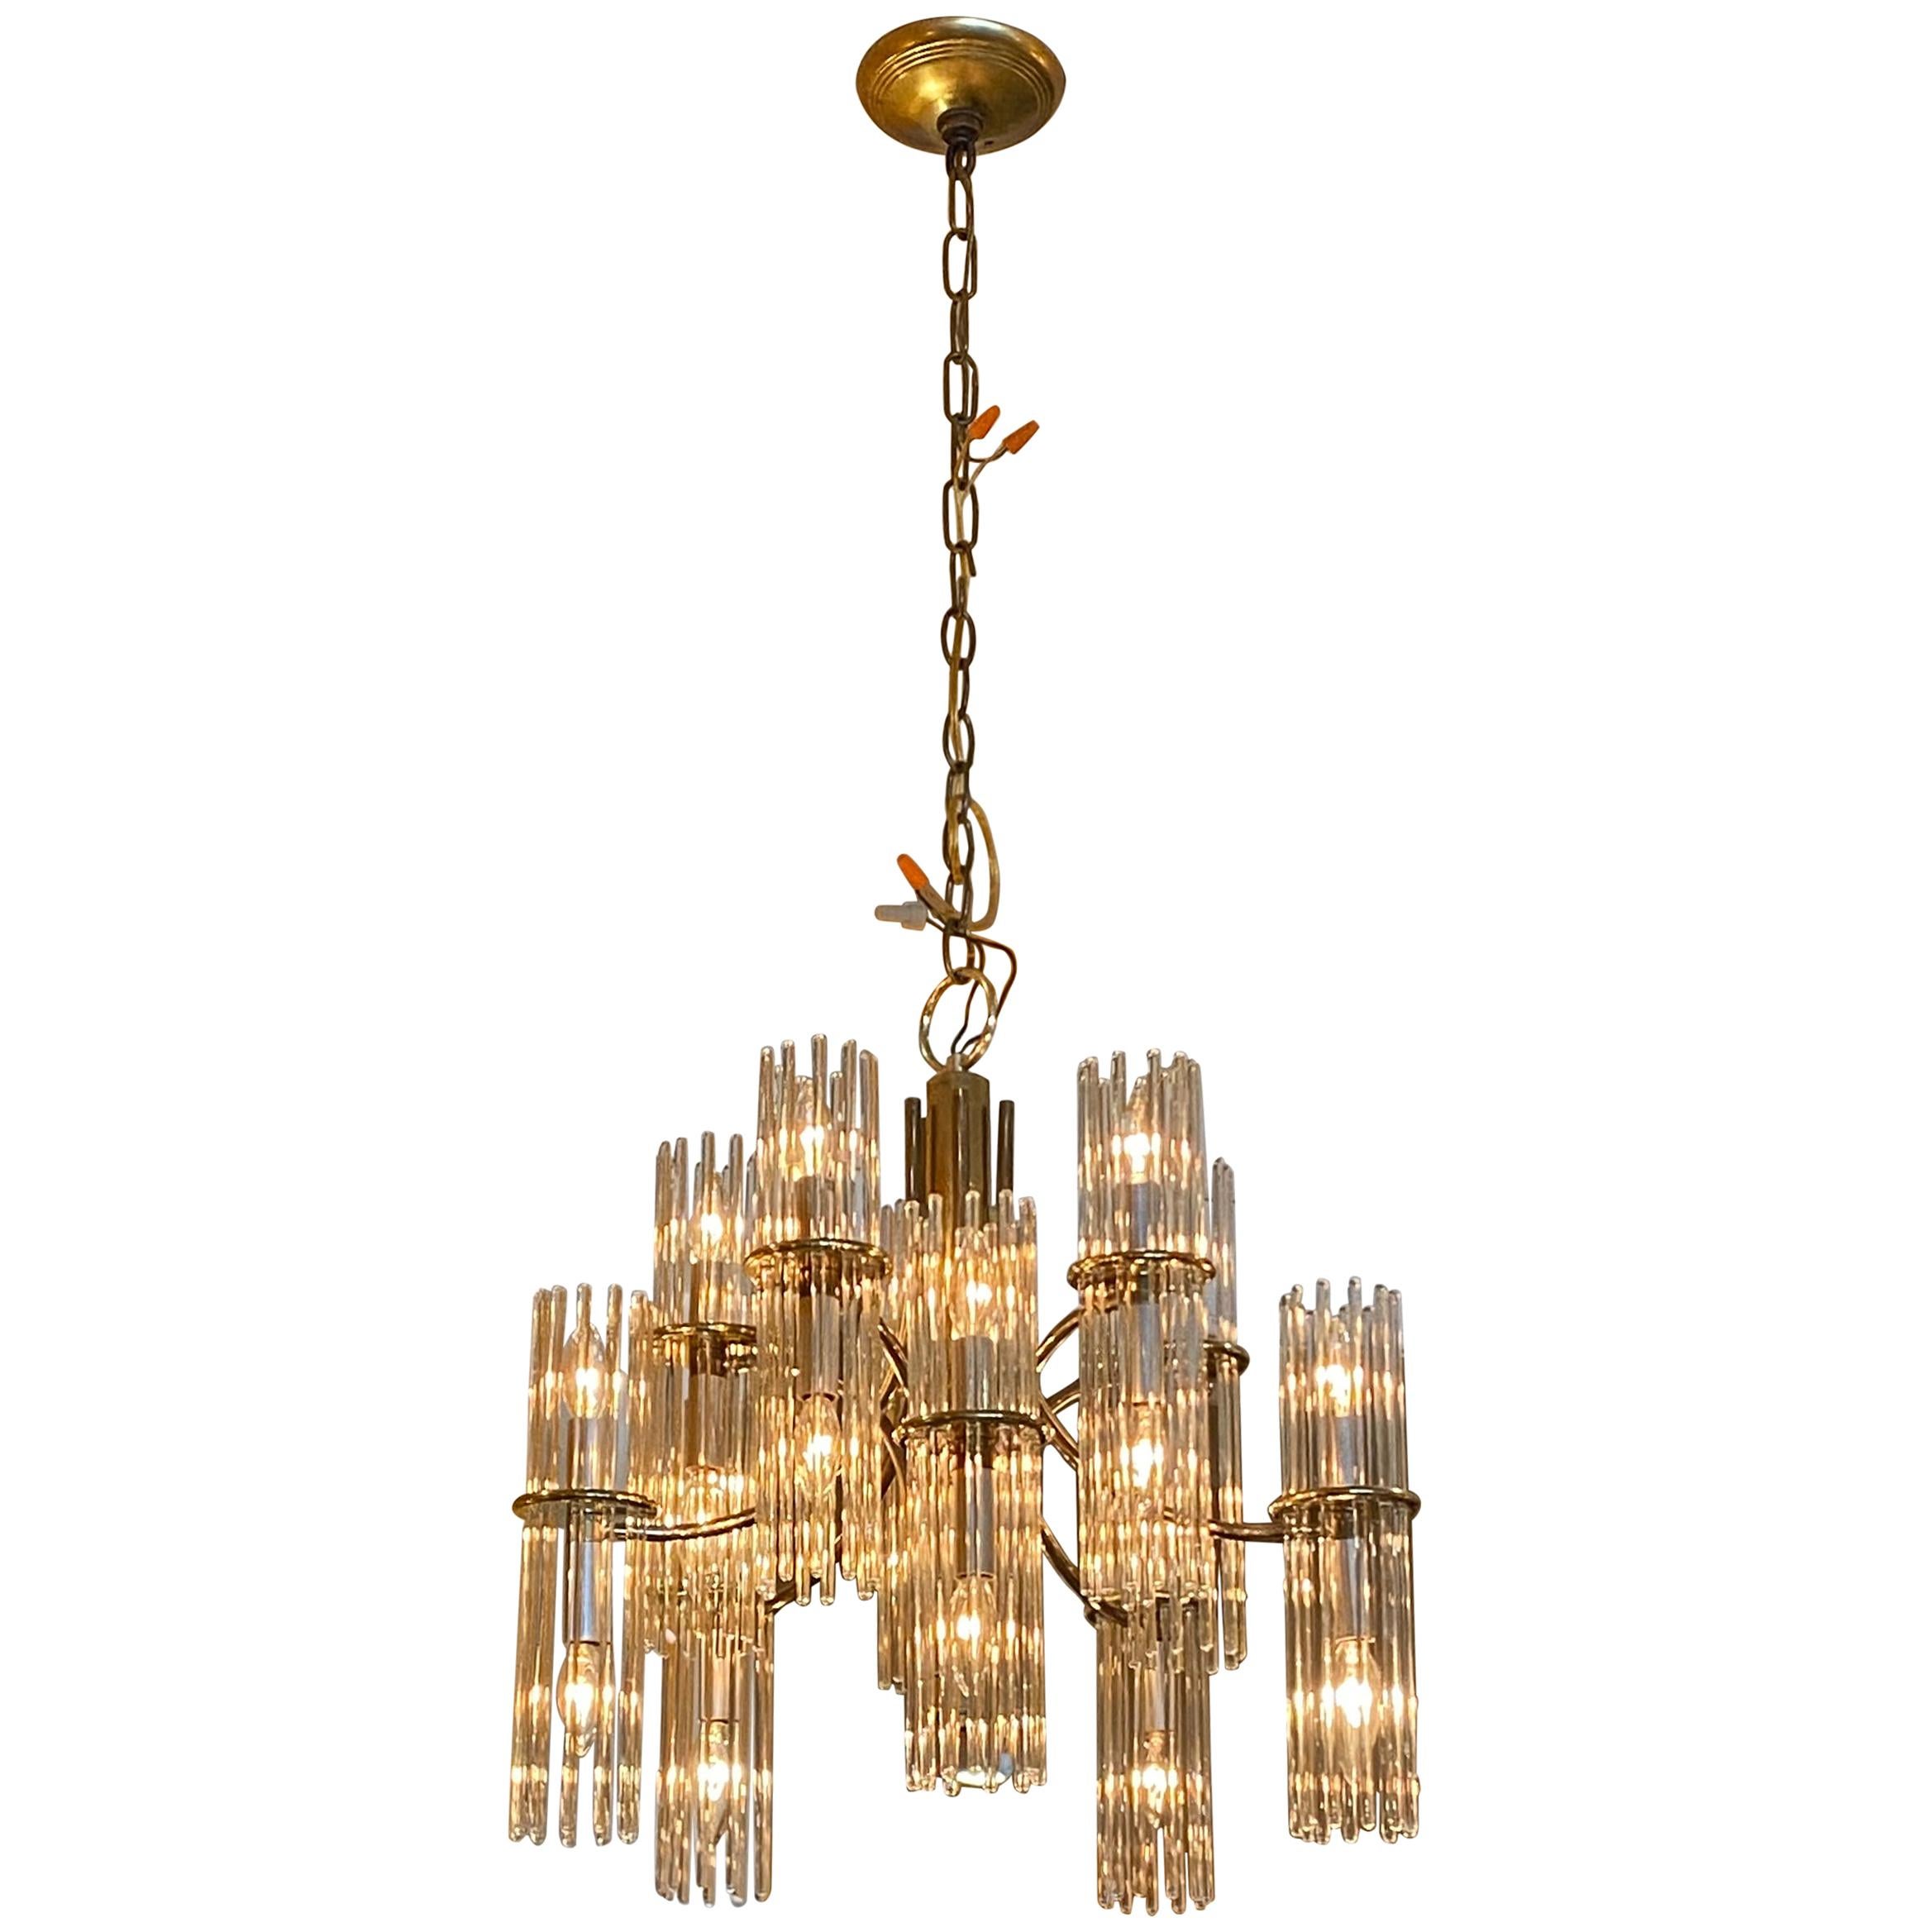 Brass-Plated 10 Arm Midcentury Chandelier with Glass Prisms For Sale